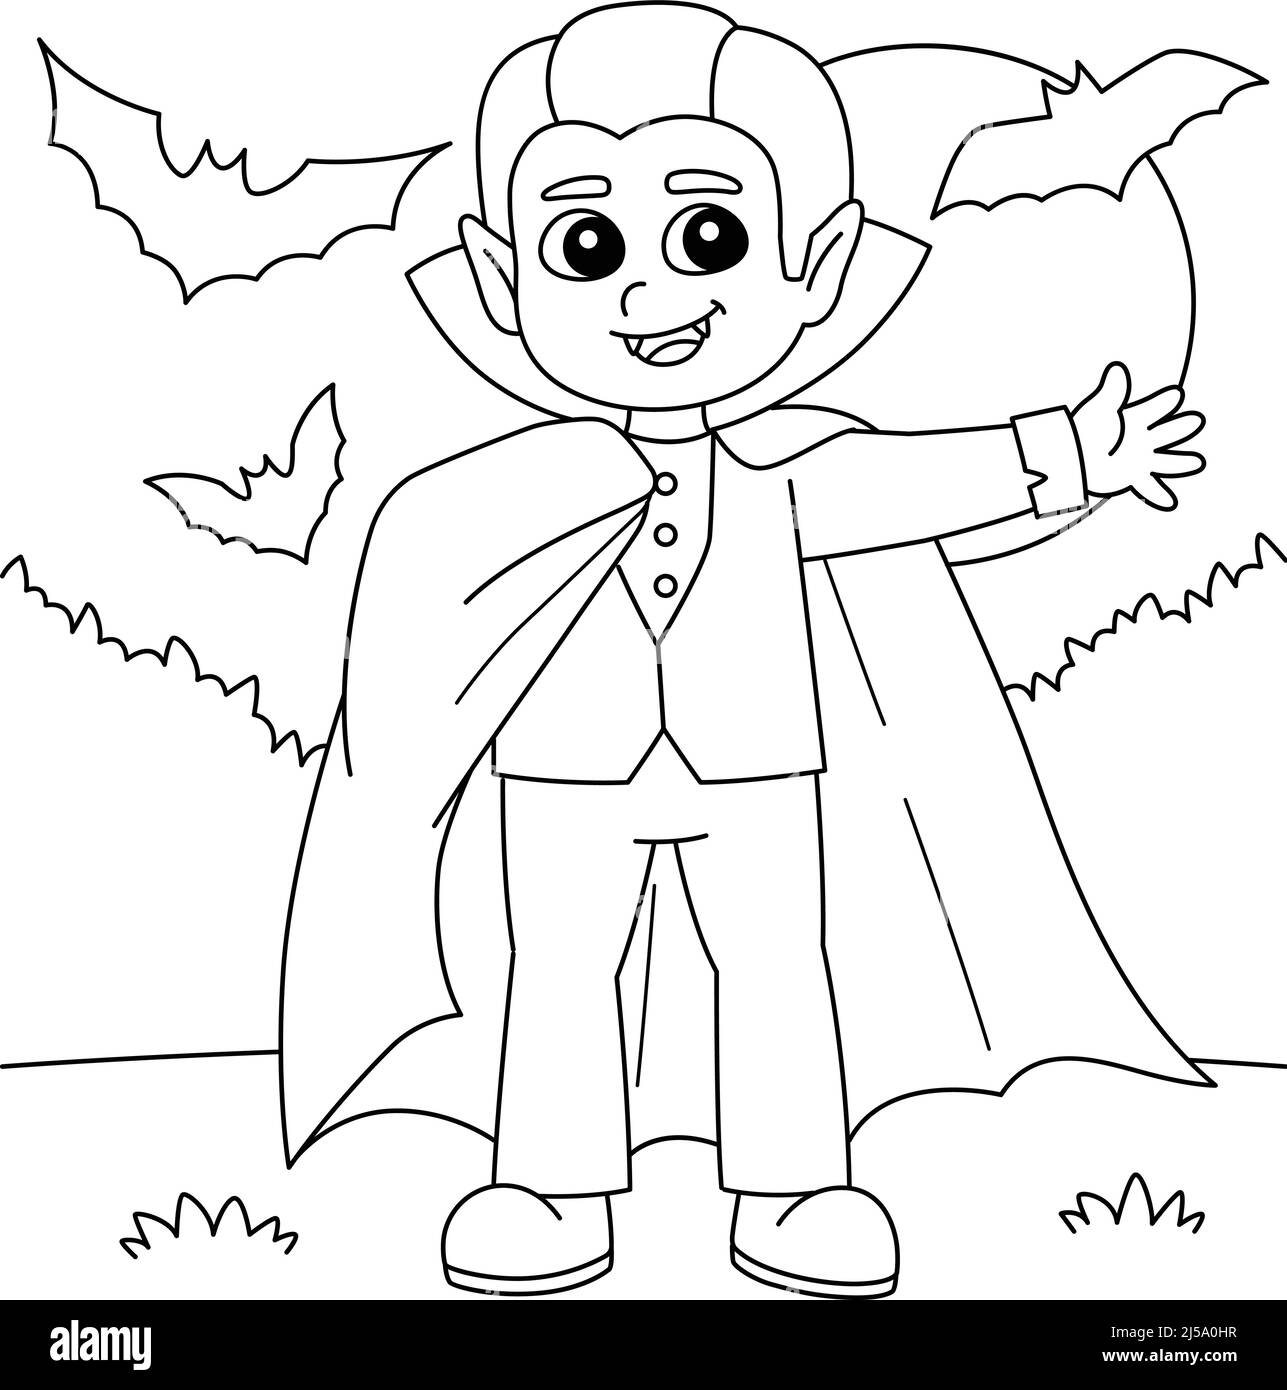 Digital Clip art Stamp  Blackline clipart Coloring Vampire kids costume clipart commercial use Vampire Party